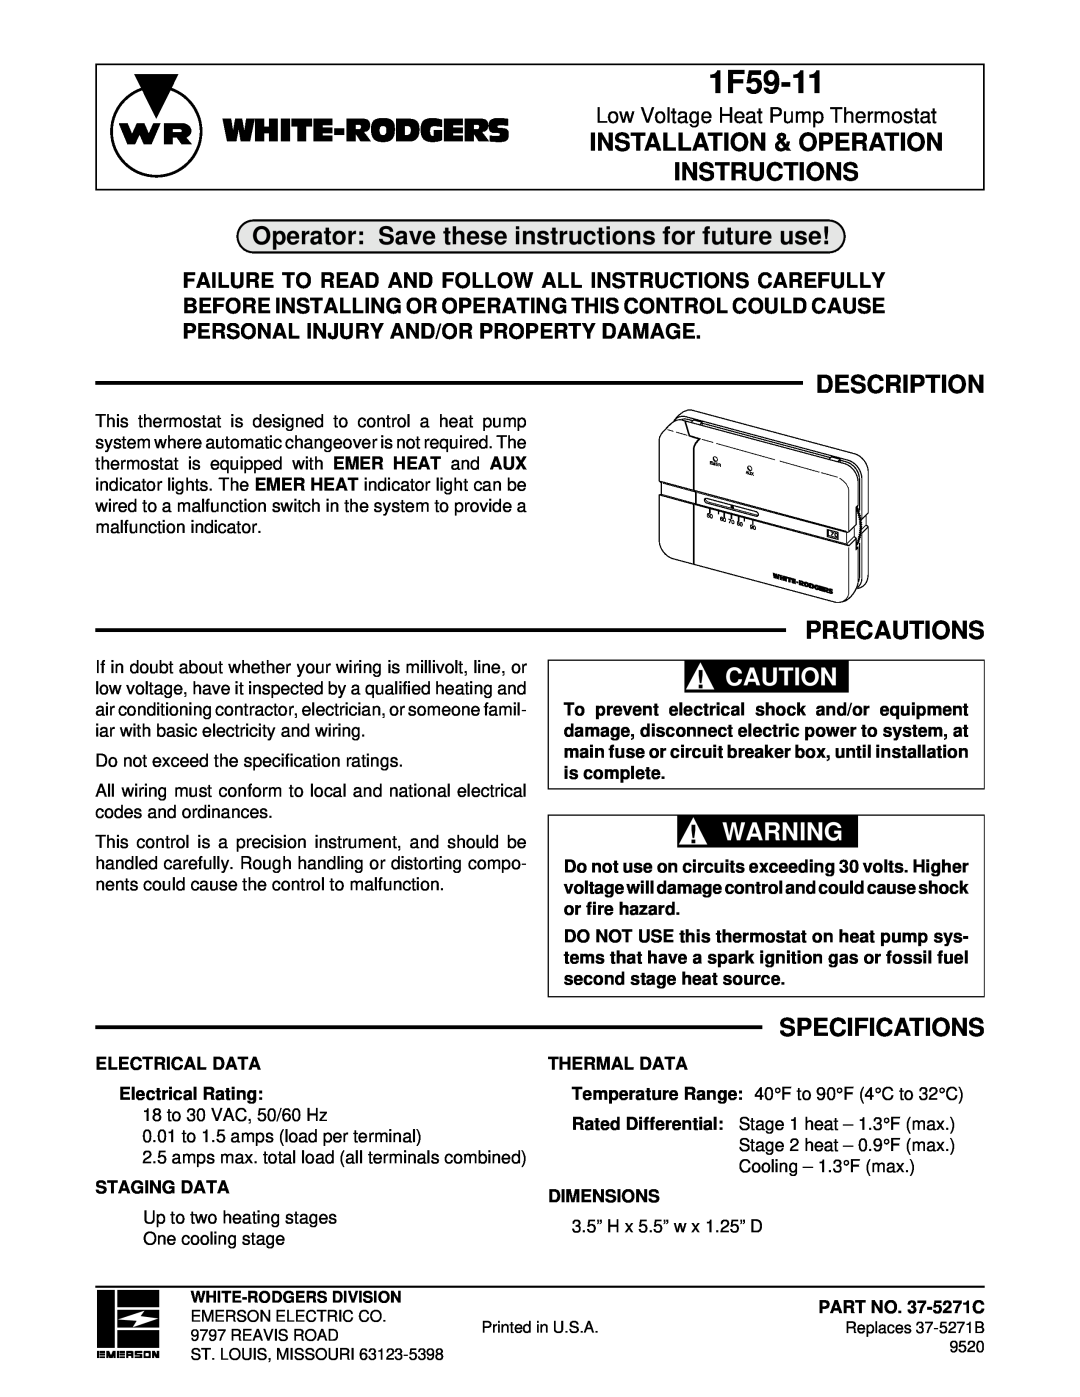 White Rodgers 1F59-11 specifications White-Rodgers Installation & Operation Instructions, Description, Precautions 